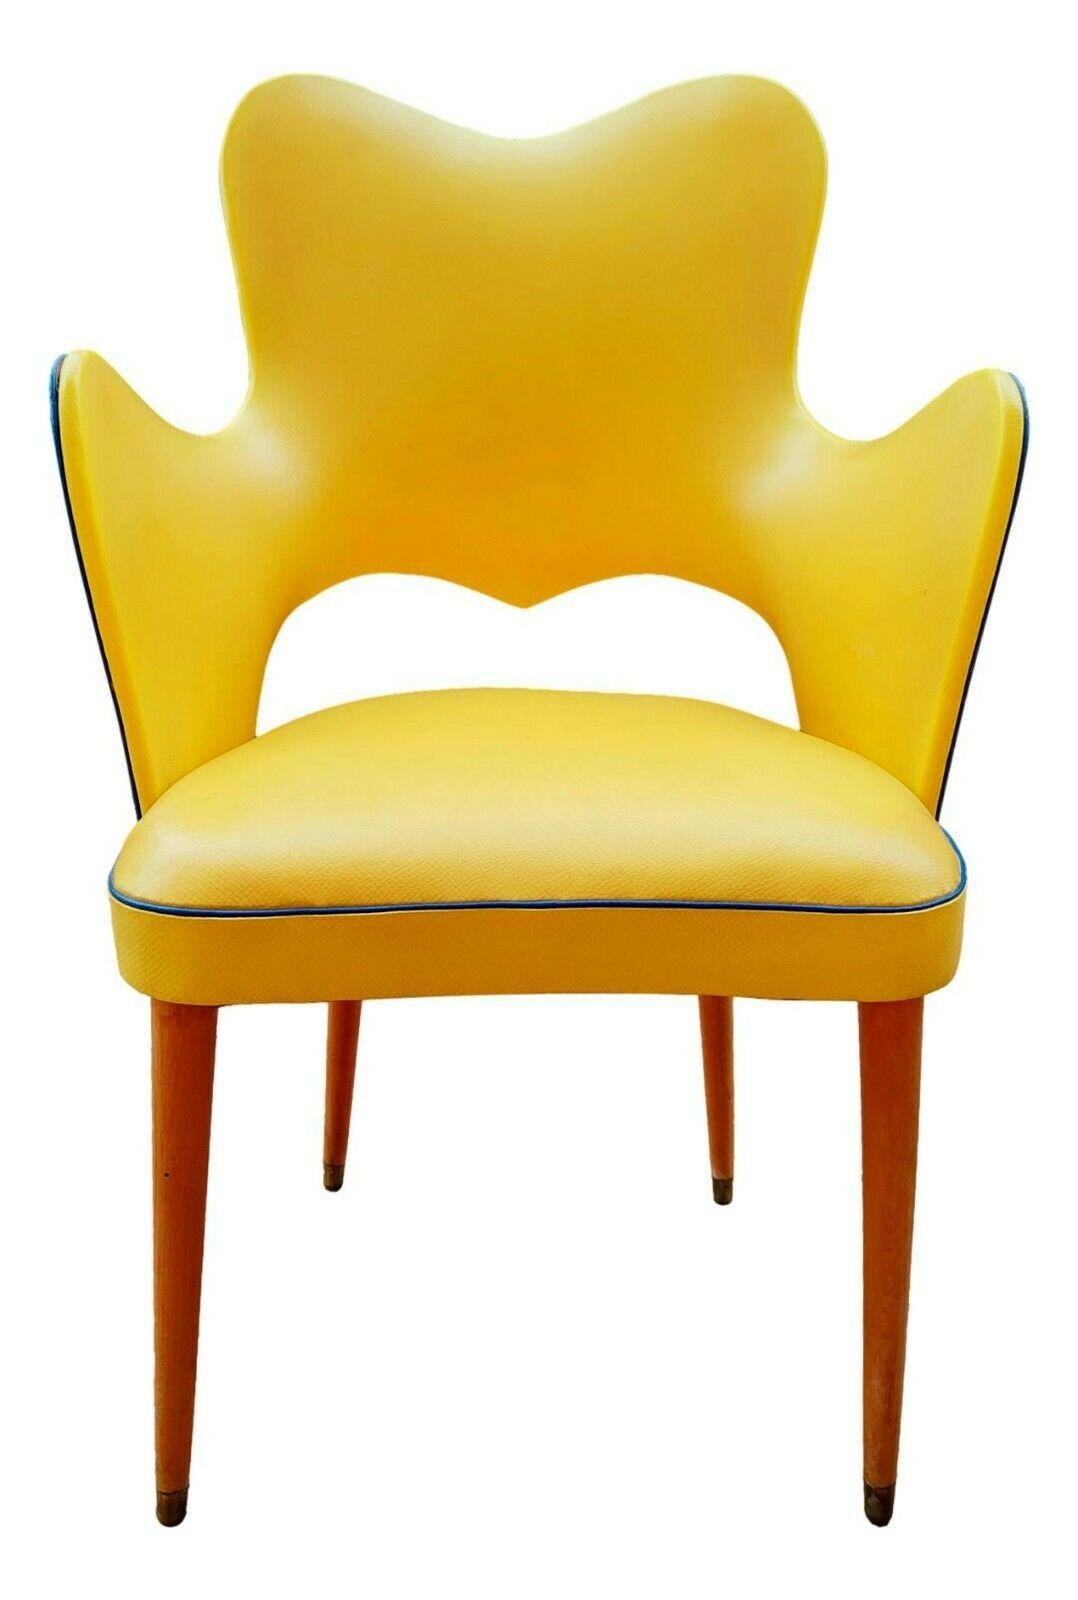 Rare splendid two-tone skai armchair, early 1950s, design often attributed to Gastone Rinaldi, made on a wooden frame with an enveloping shape that ends with a pair of comfortable armrests

Legs in wood with brass tip

It measures 92 cm in